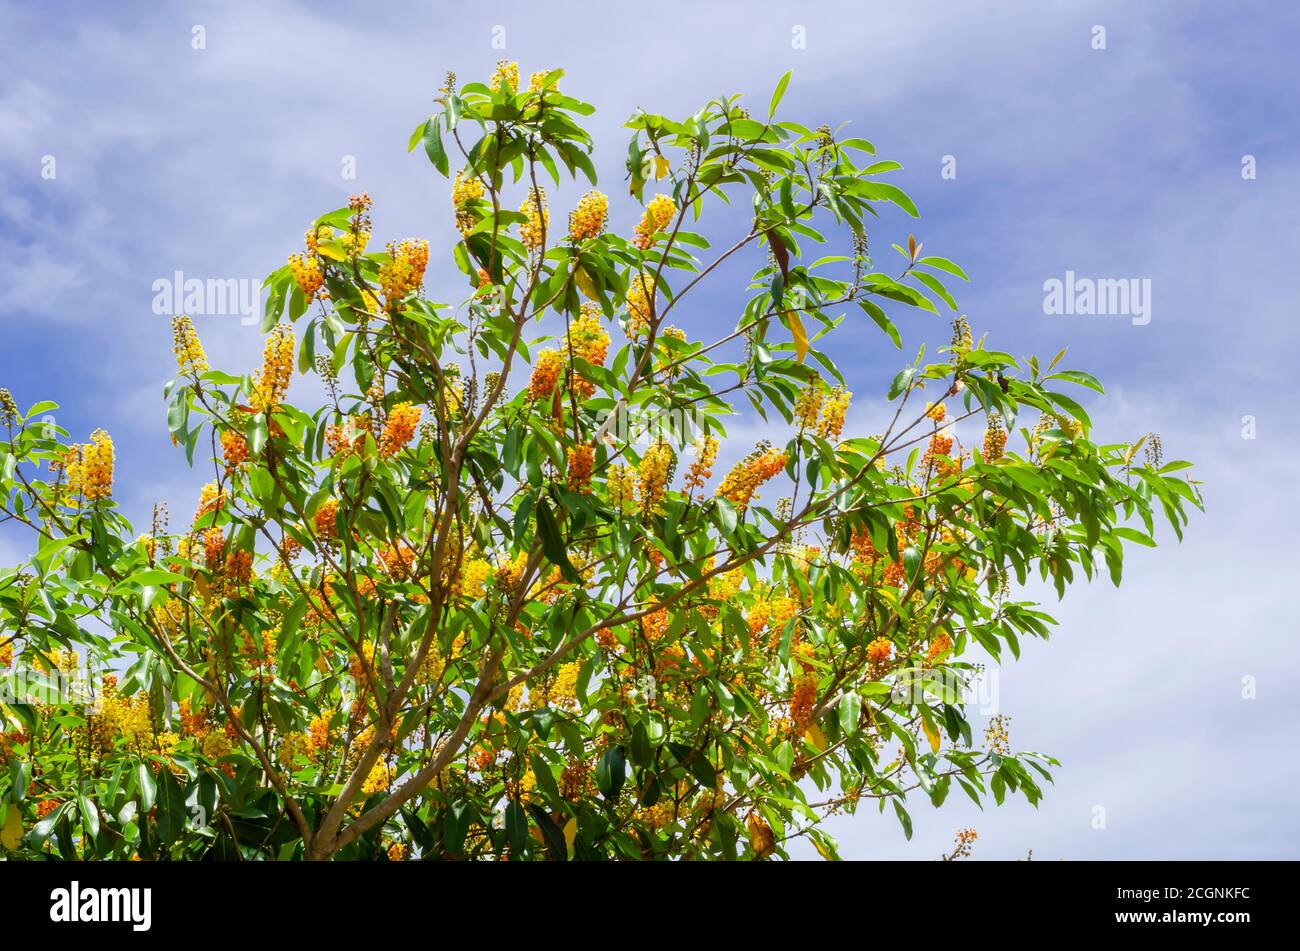 Hogberry (Nanche) Branches With Blossoms Stock Photo